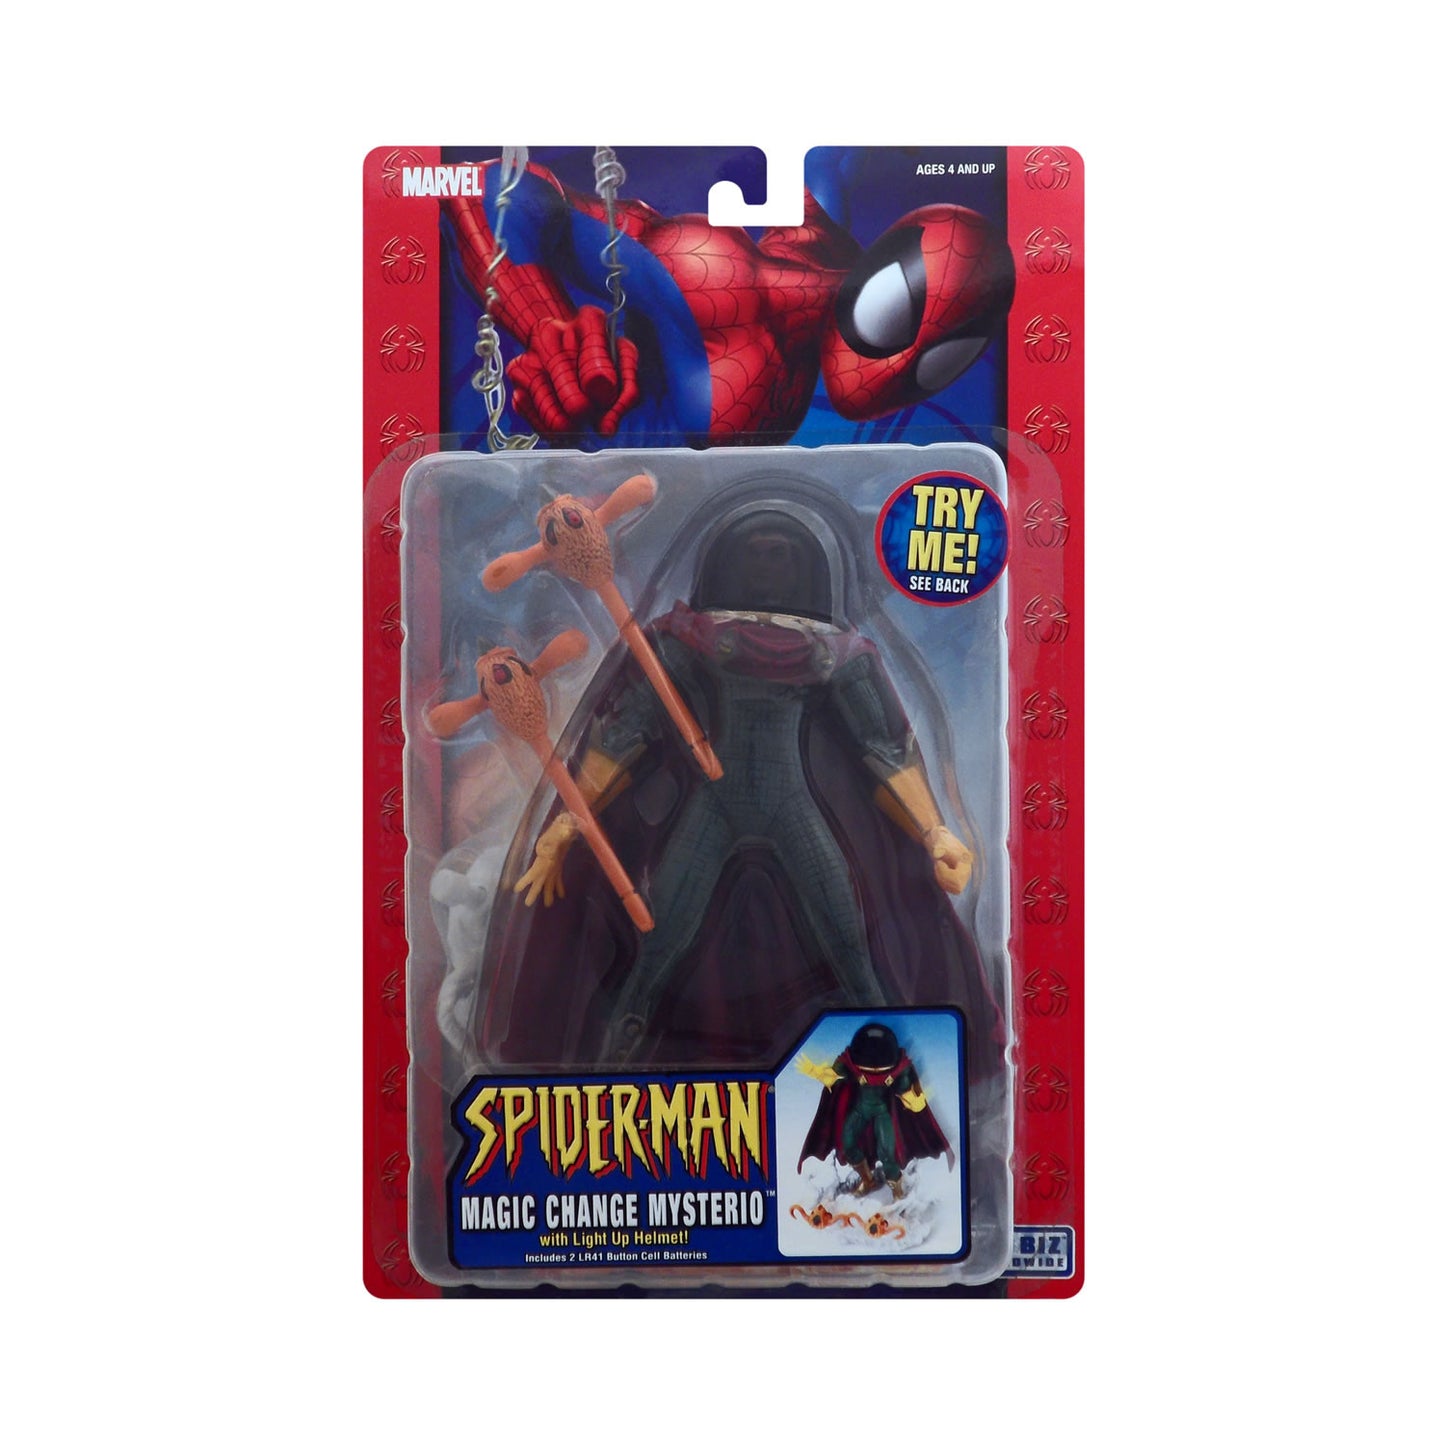 Magic Change Mysterio with Light Up Helmet from Spider-Man